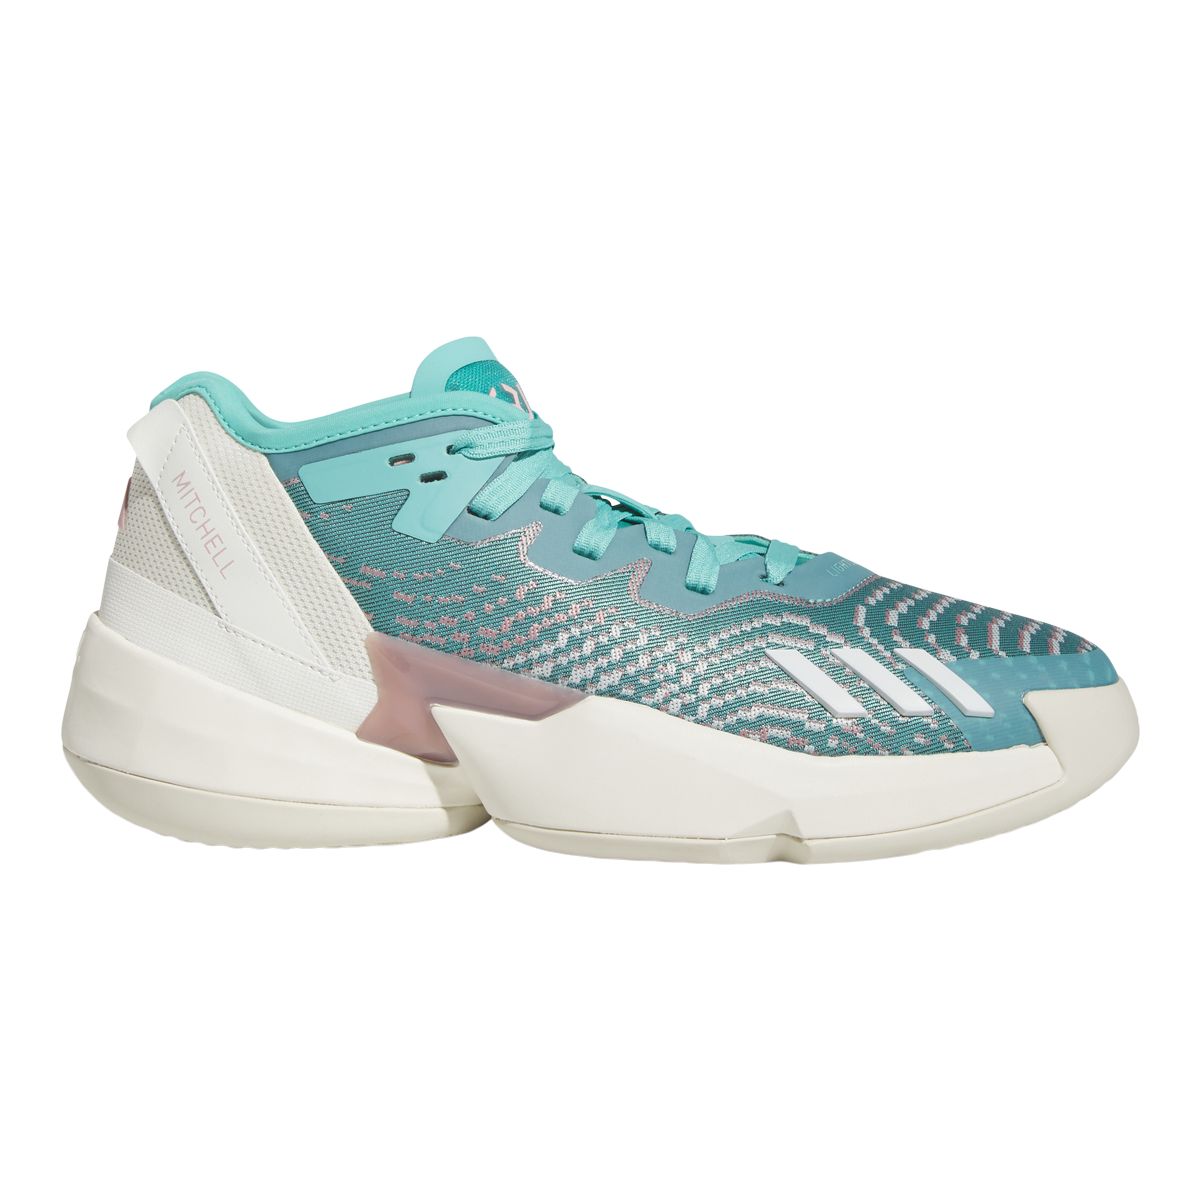 adidas Men's/Women's D.o.n Issue 4 Basketball Shoes